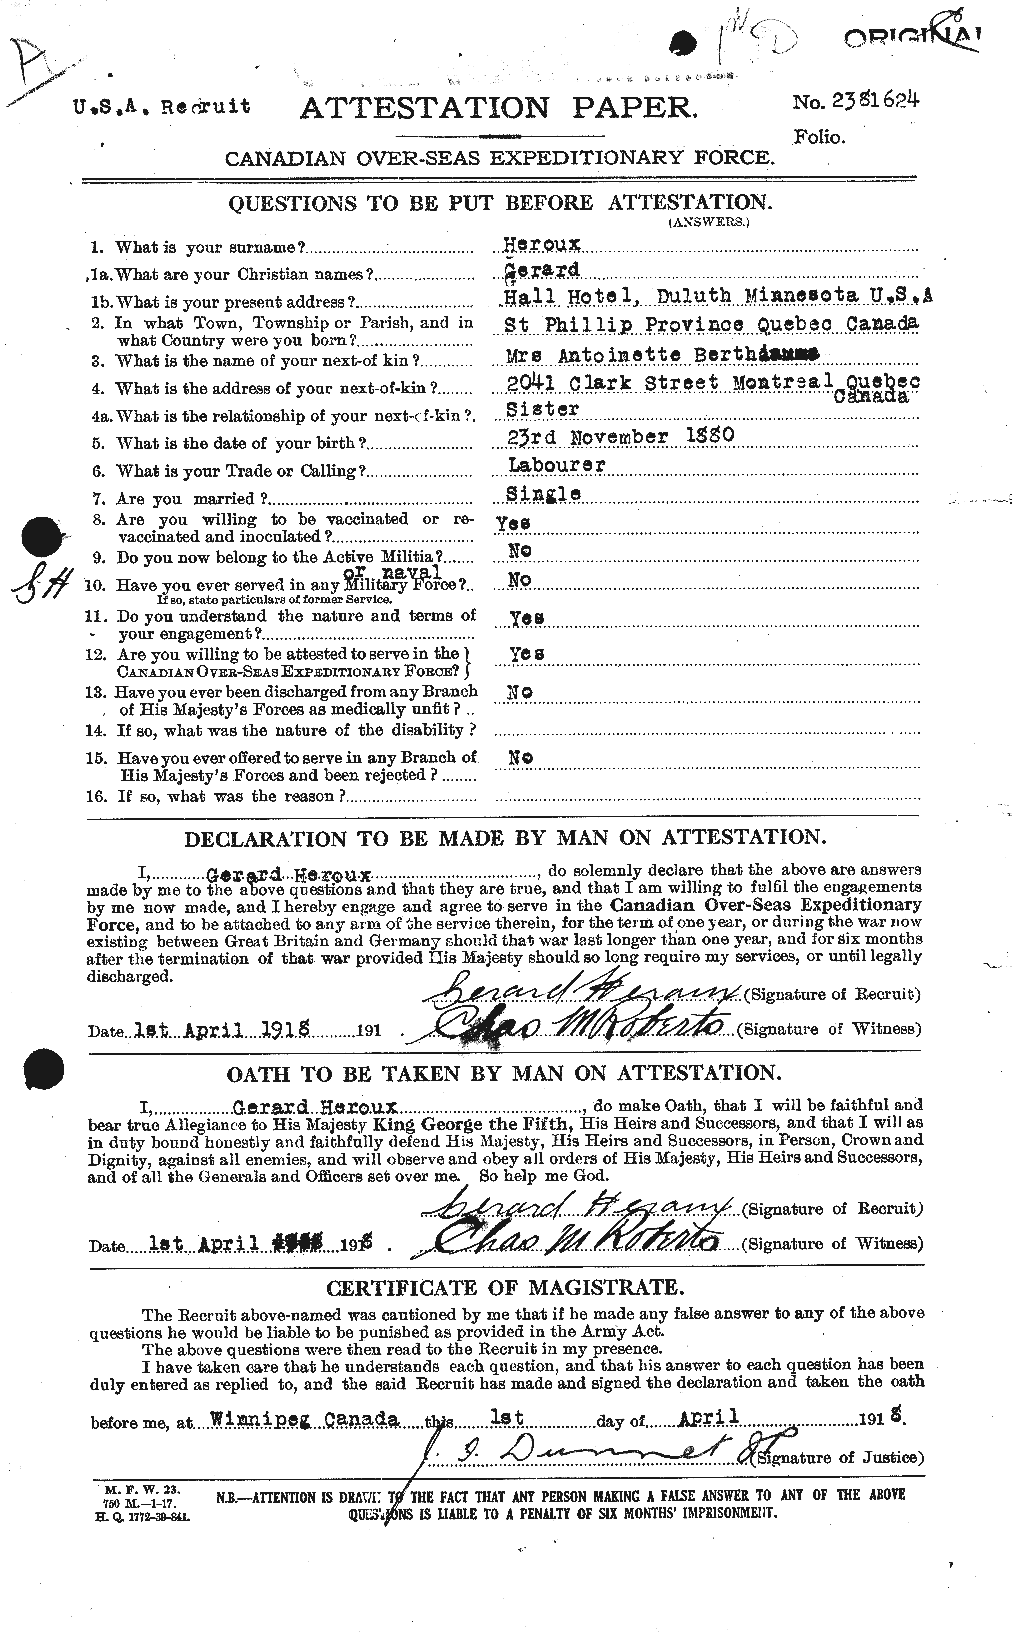 Personnel Records of the First World War - CEF 388523a